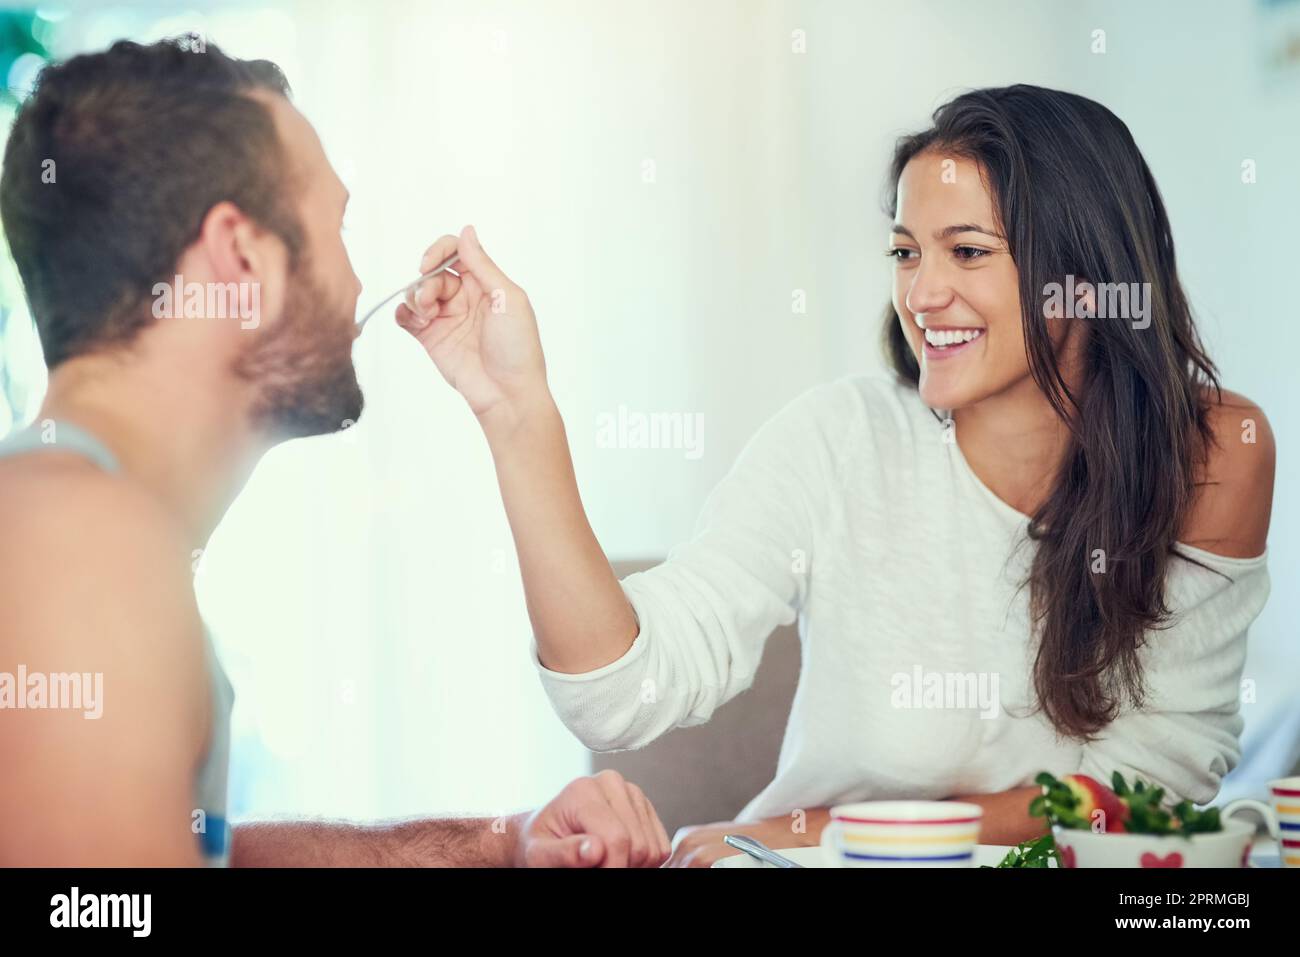 Youre going to love this. a happy young woman feeding her boyfriend a bite of her breakfast at home. Stock Photo